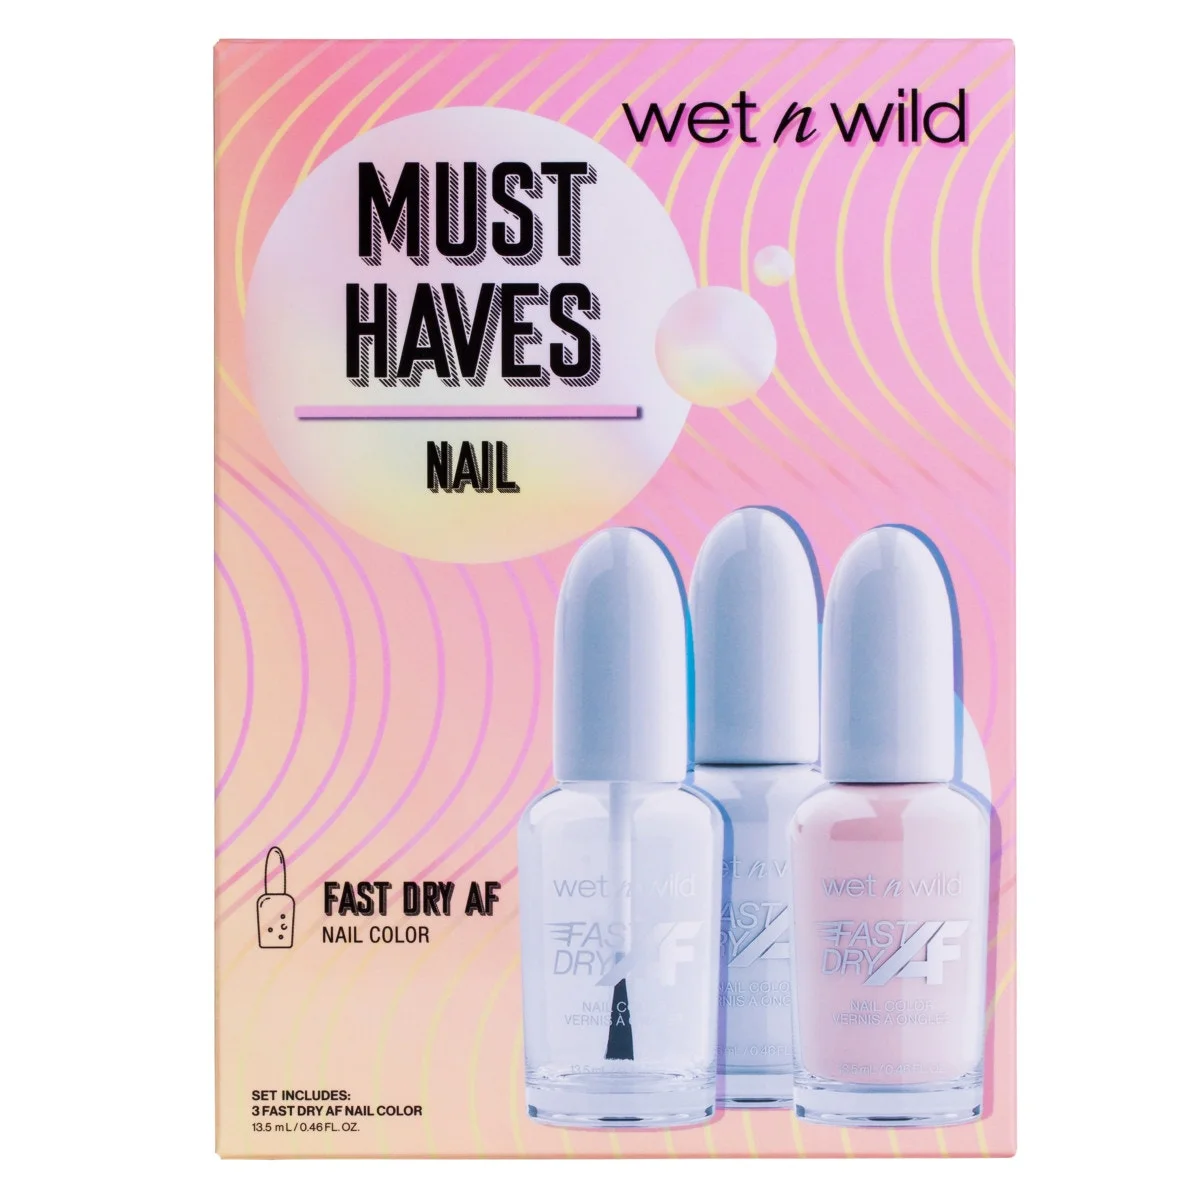 WET N WILD Must Haves Nail Fast Dry AF Nail Color مجموعة اصباغ الاظافر